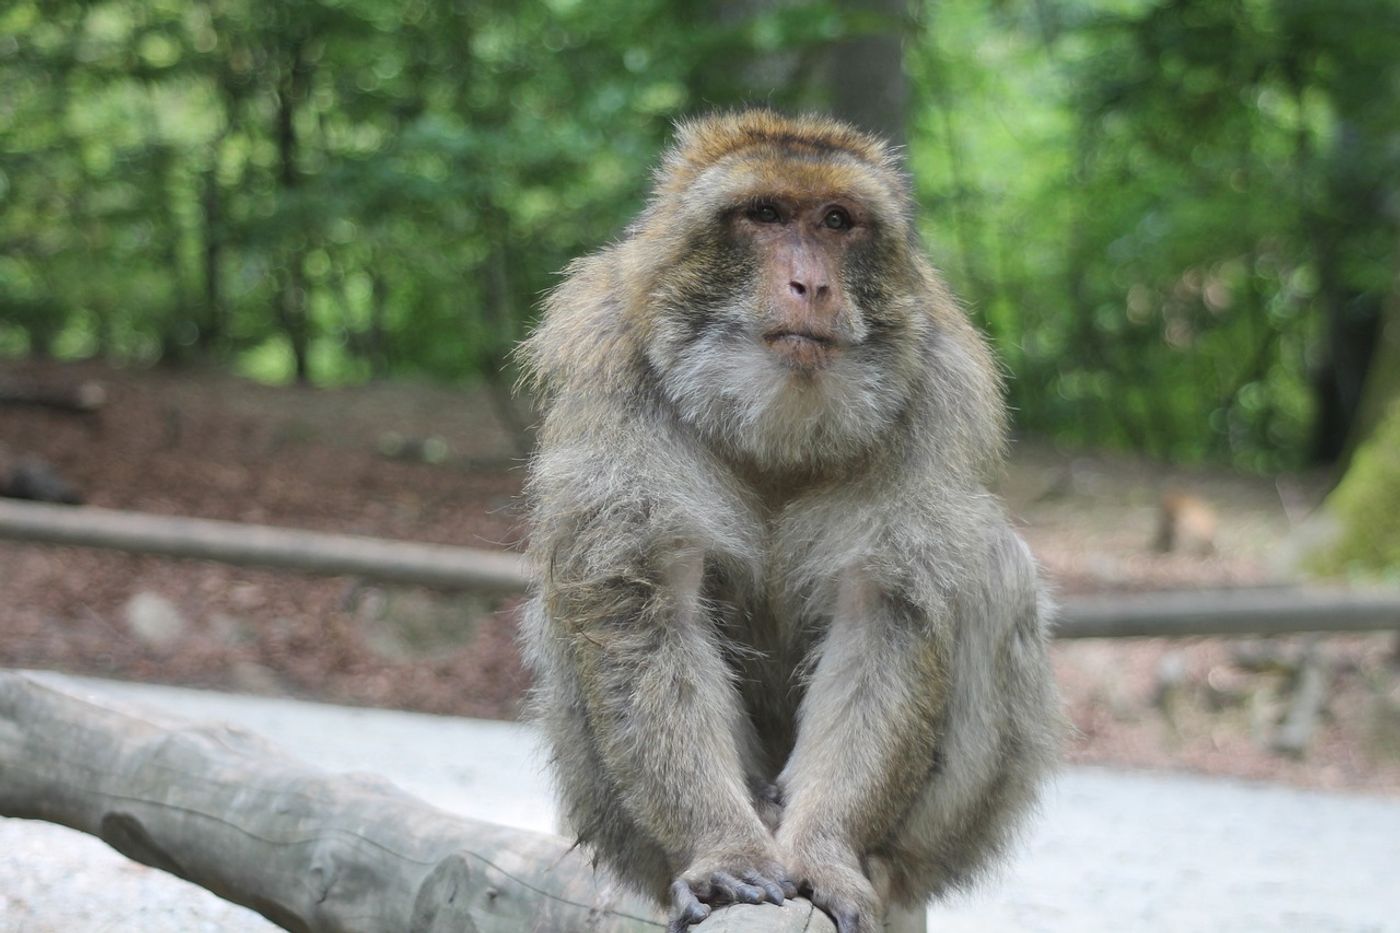 Can rhesus monkeys see faces on inanimate objects? Science says yes.